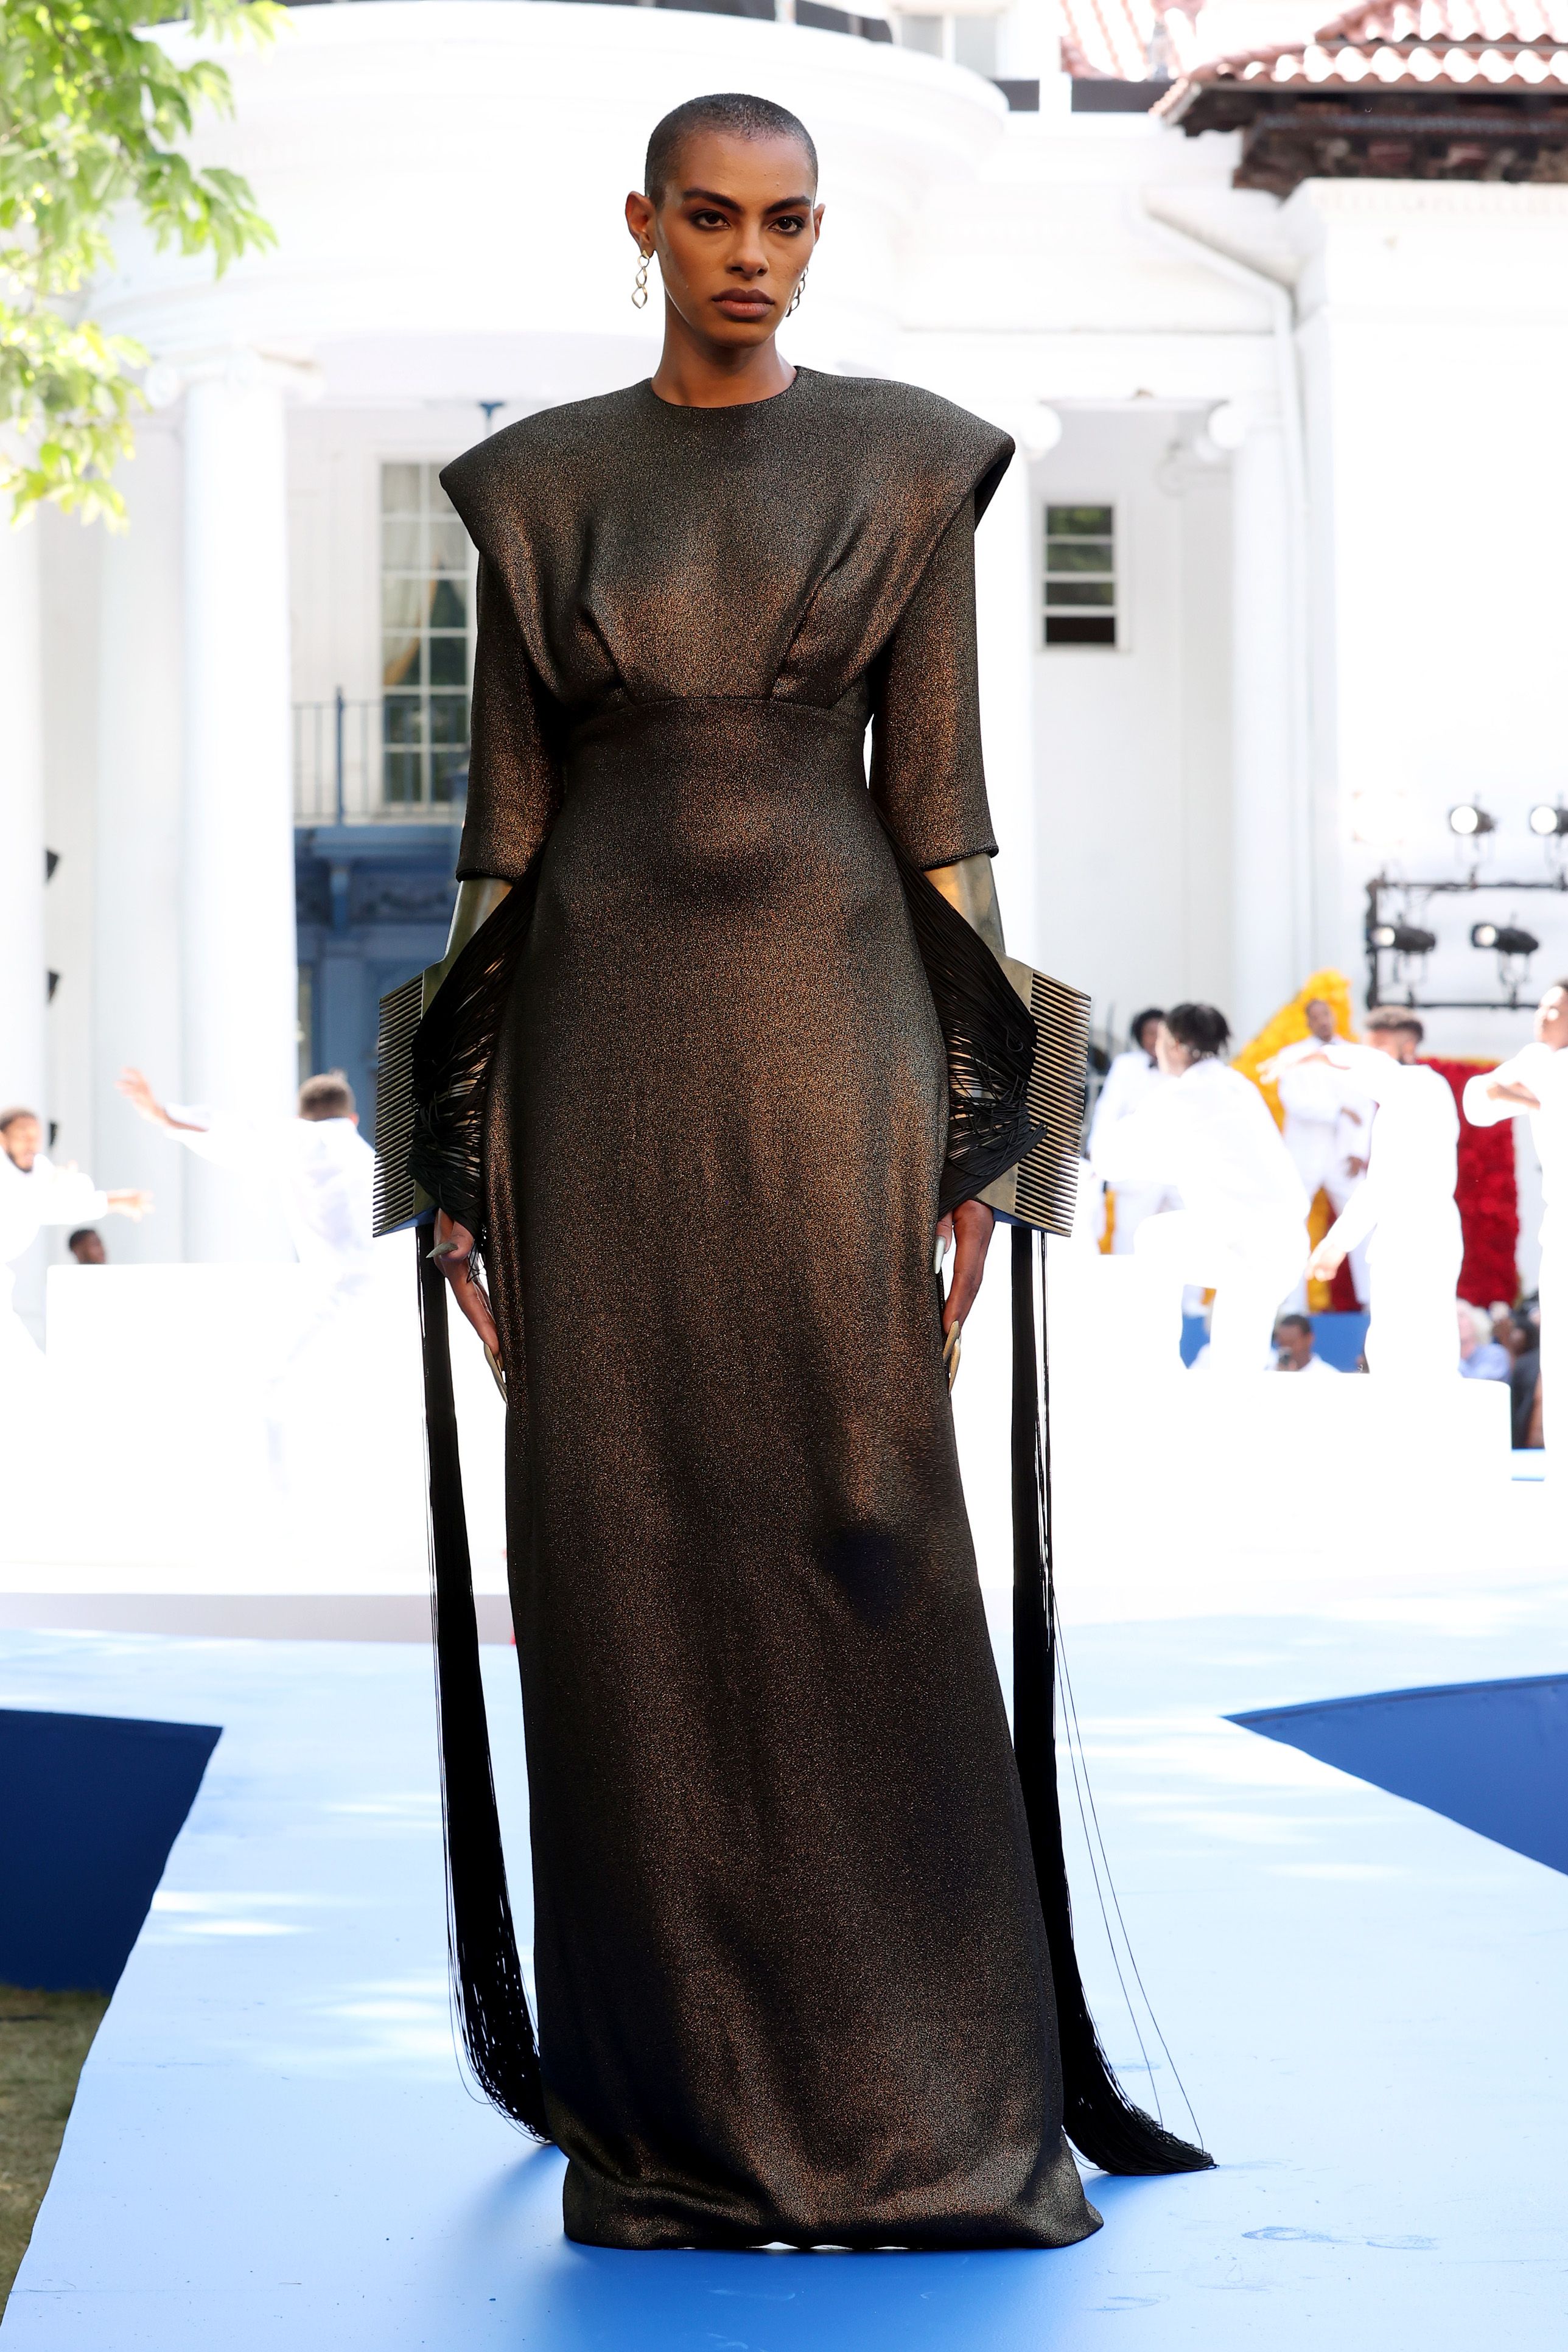 Pyer Moss Made Haute Couture History With an Emphasis on Black Innovation